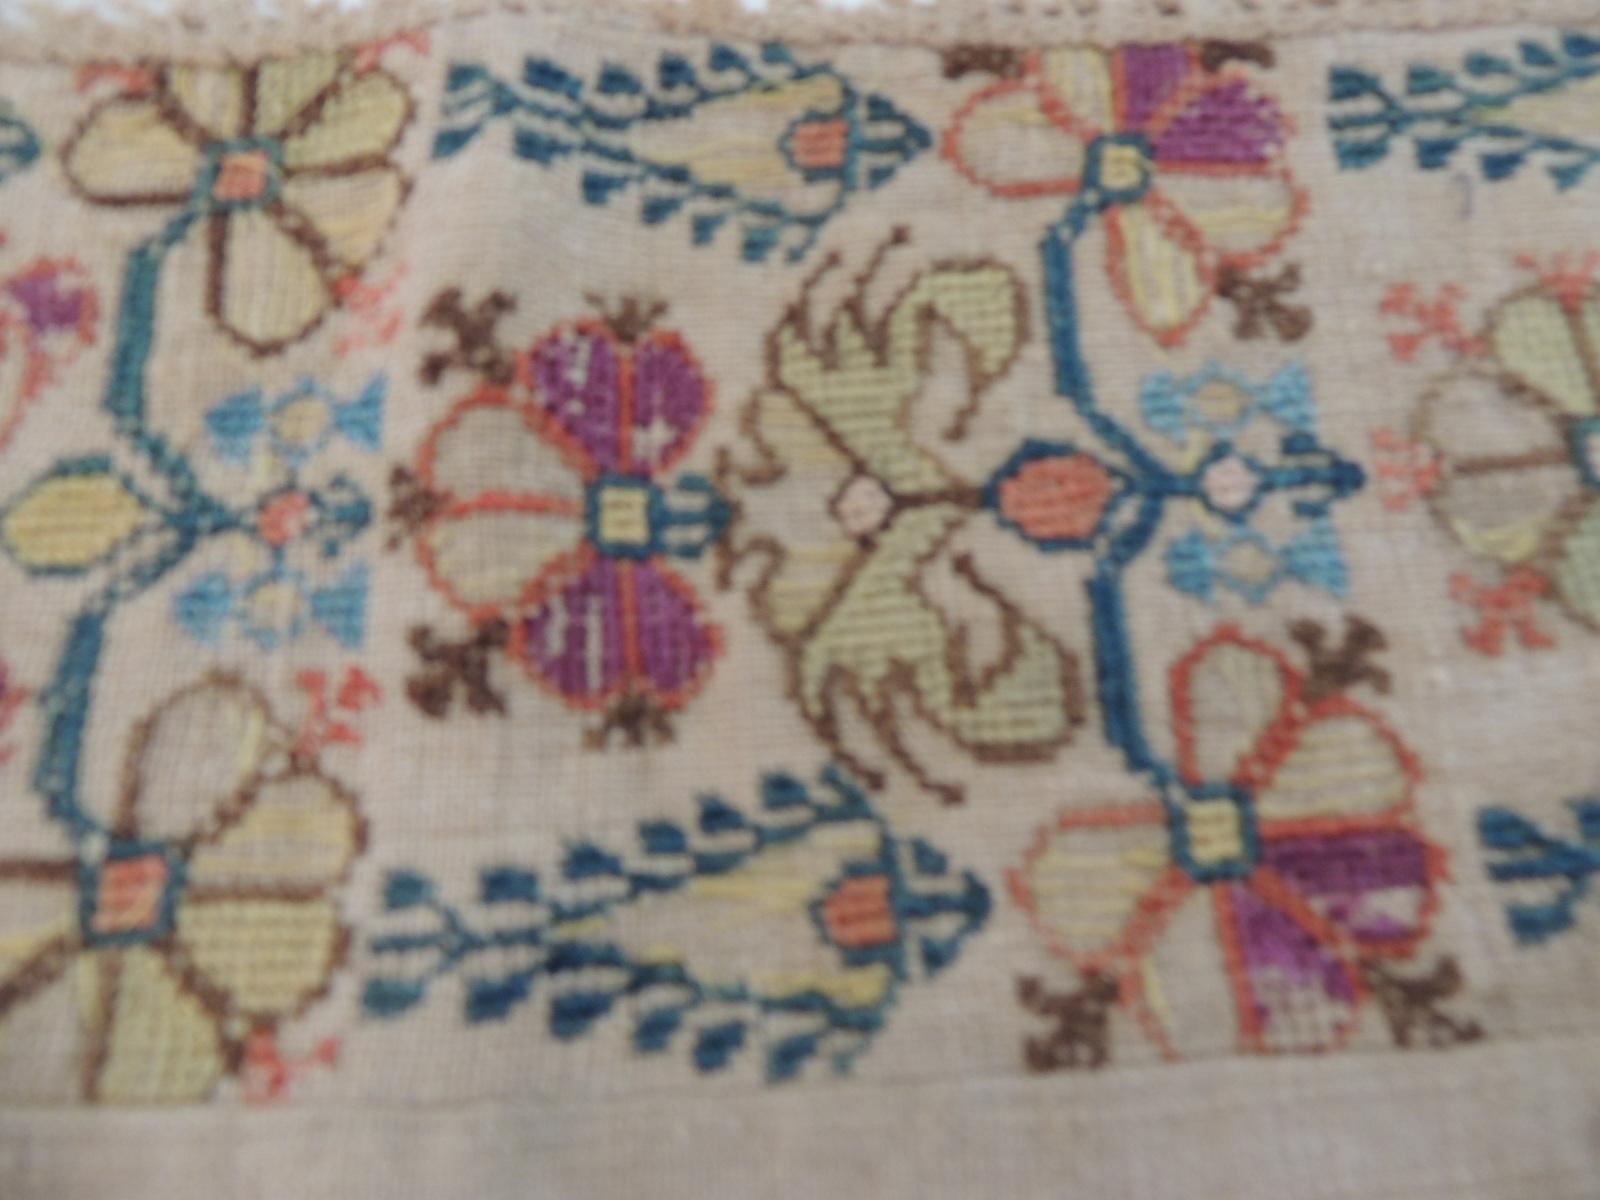 19th Century Antique Embroidered Turkish Textile Fragment